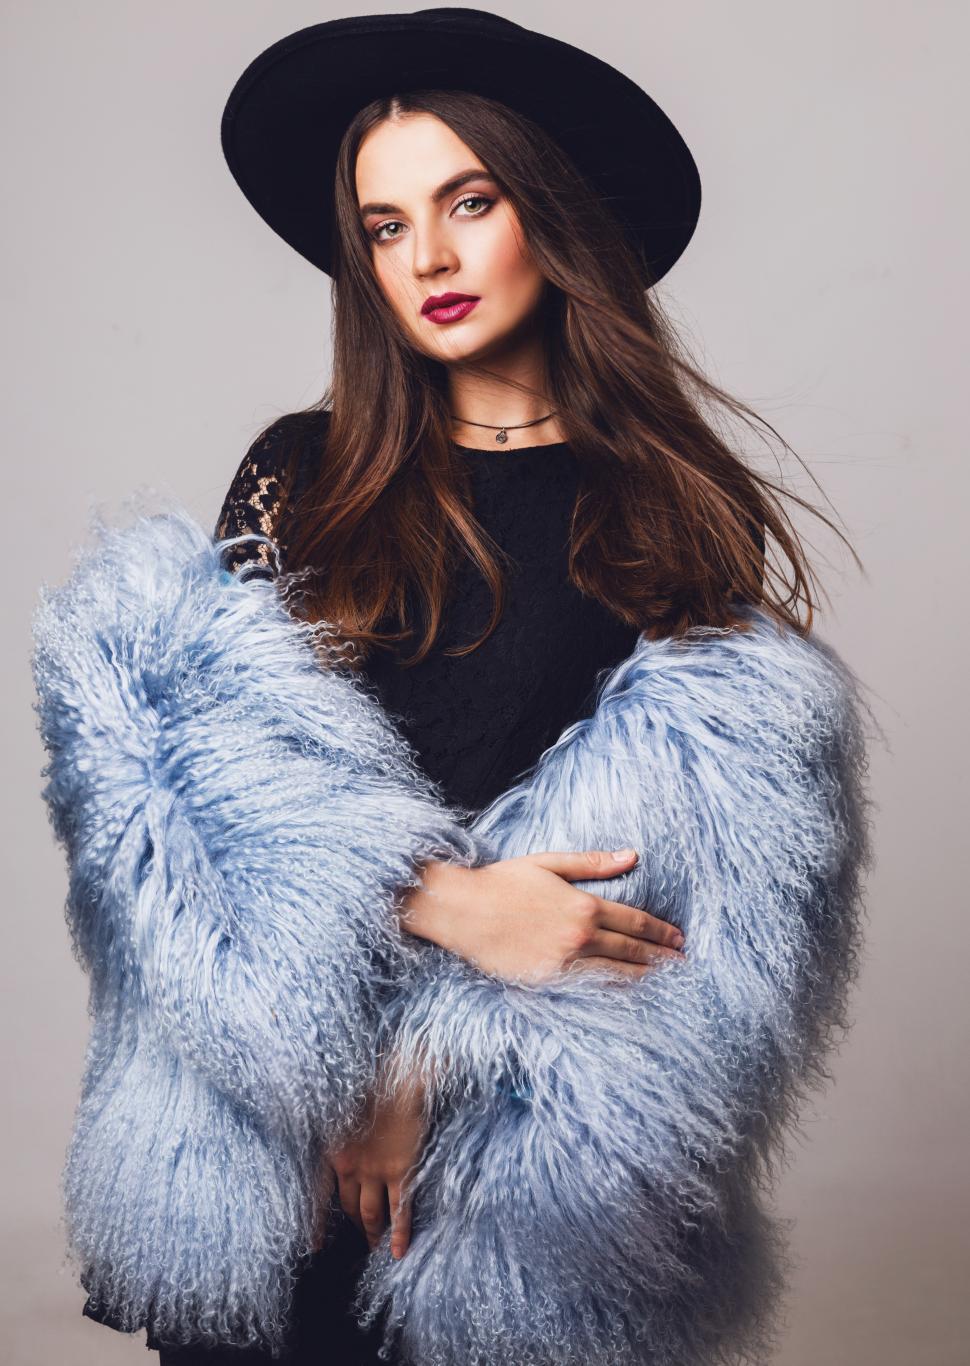 Free Image of Young model in stylish winter fluffy coat and black hat 